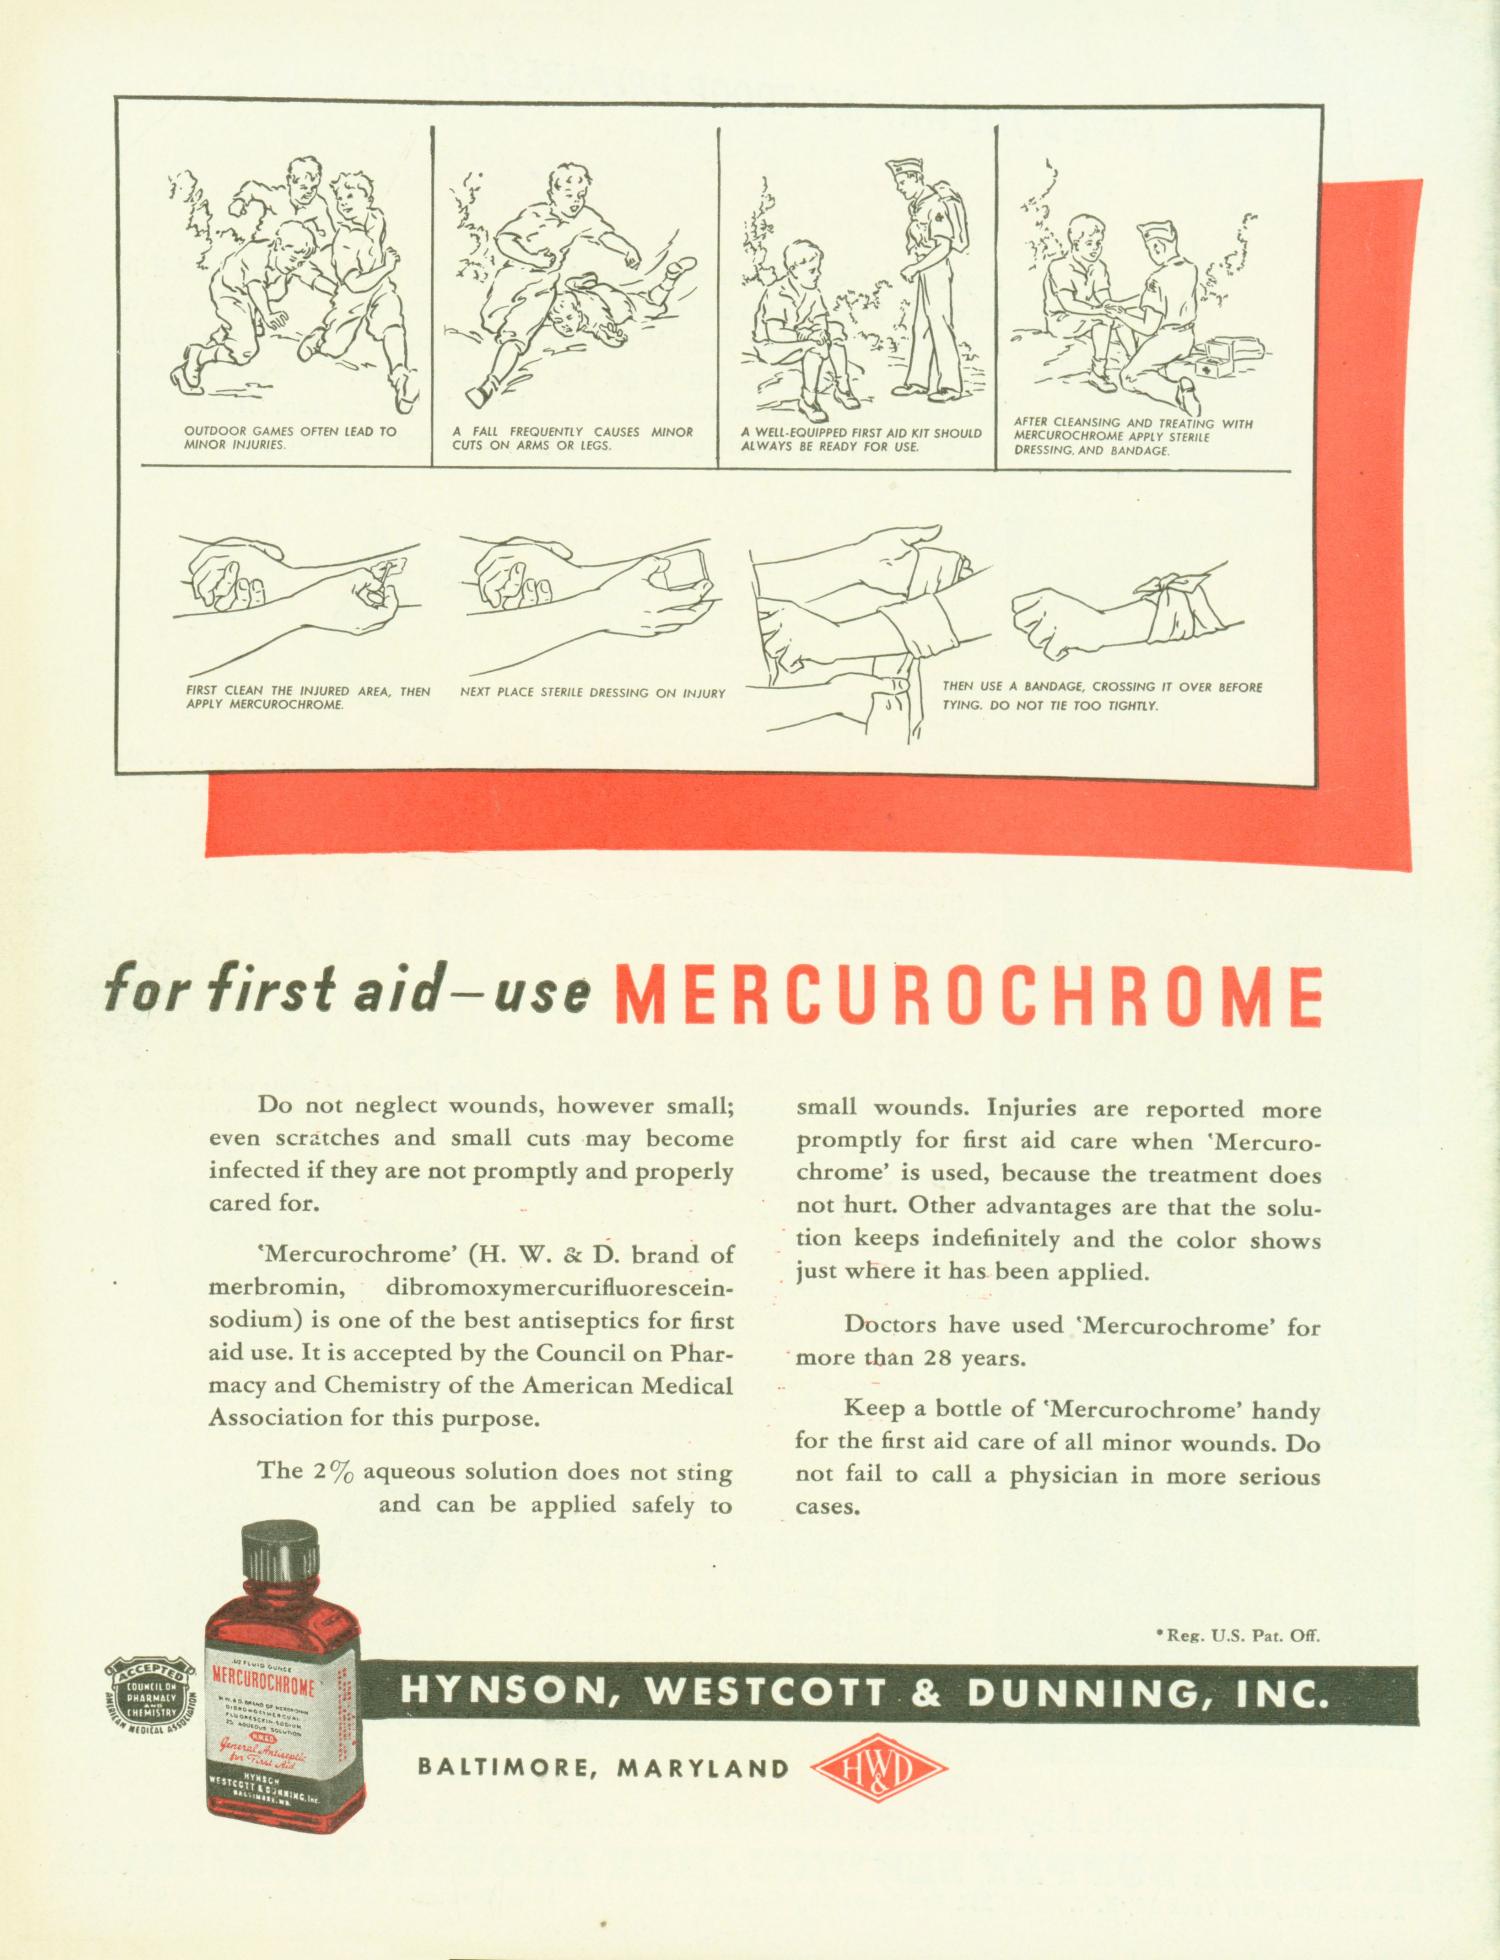 Scouting, Volume 38, Number 1, January 1950
                                                
                                                    Back Cover
                                                